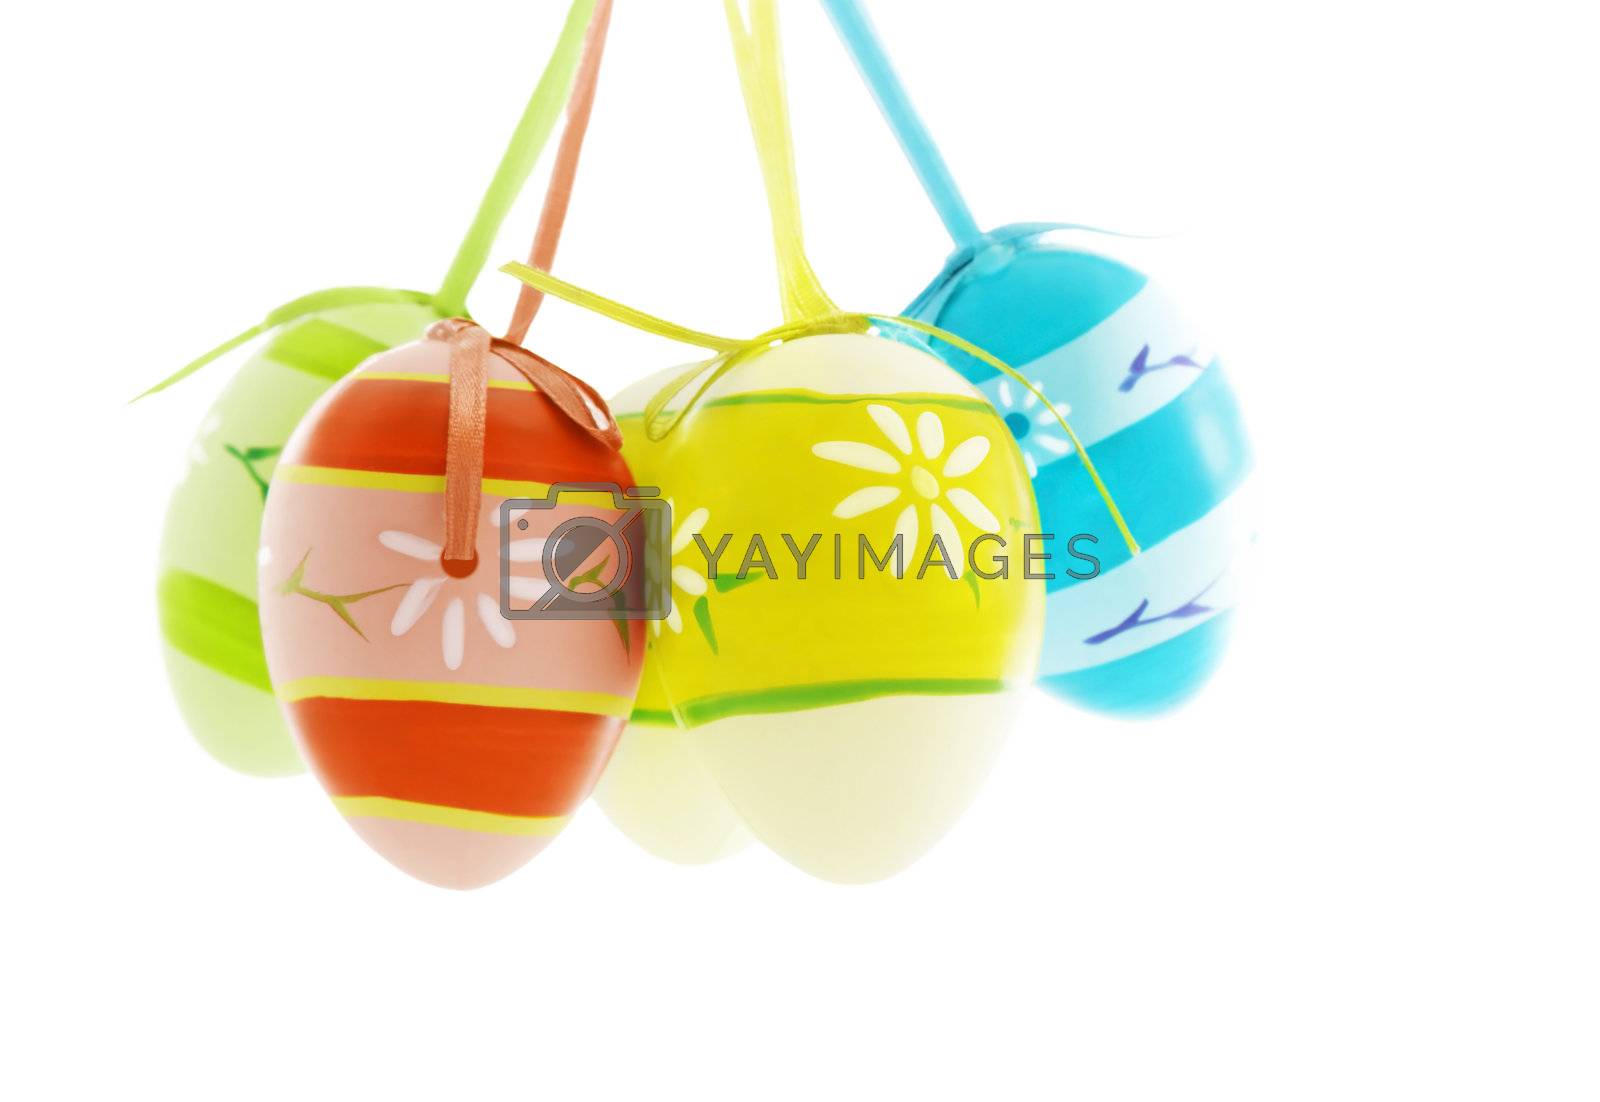 Royalty free image of Easter eggs by Anna_Omelchenko